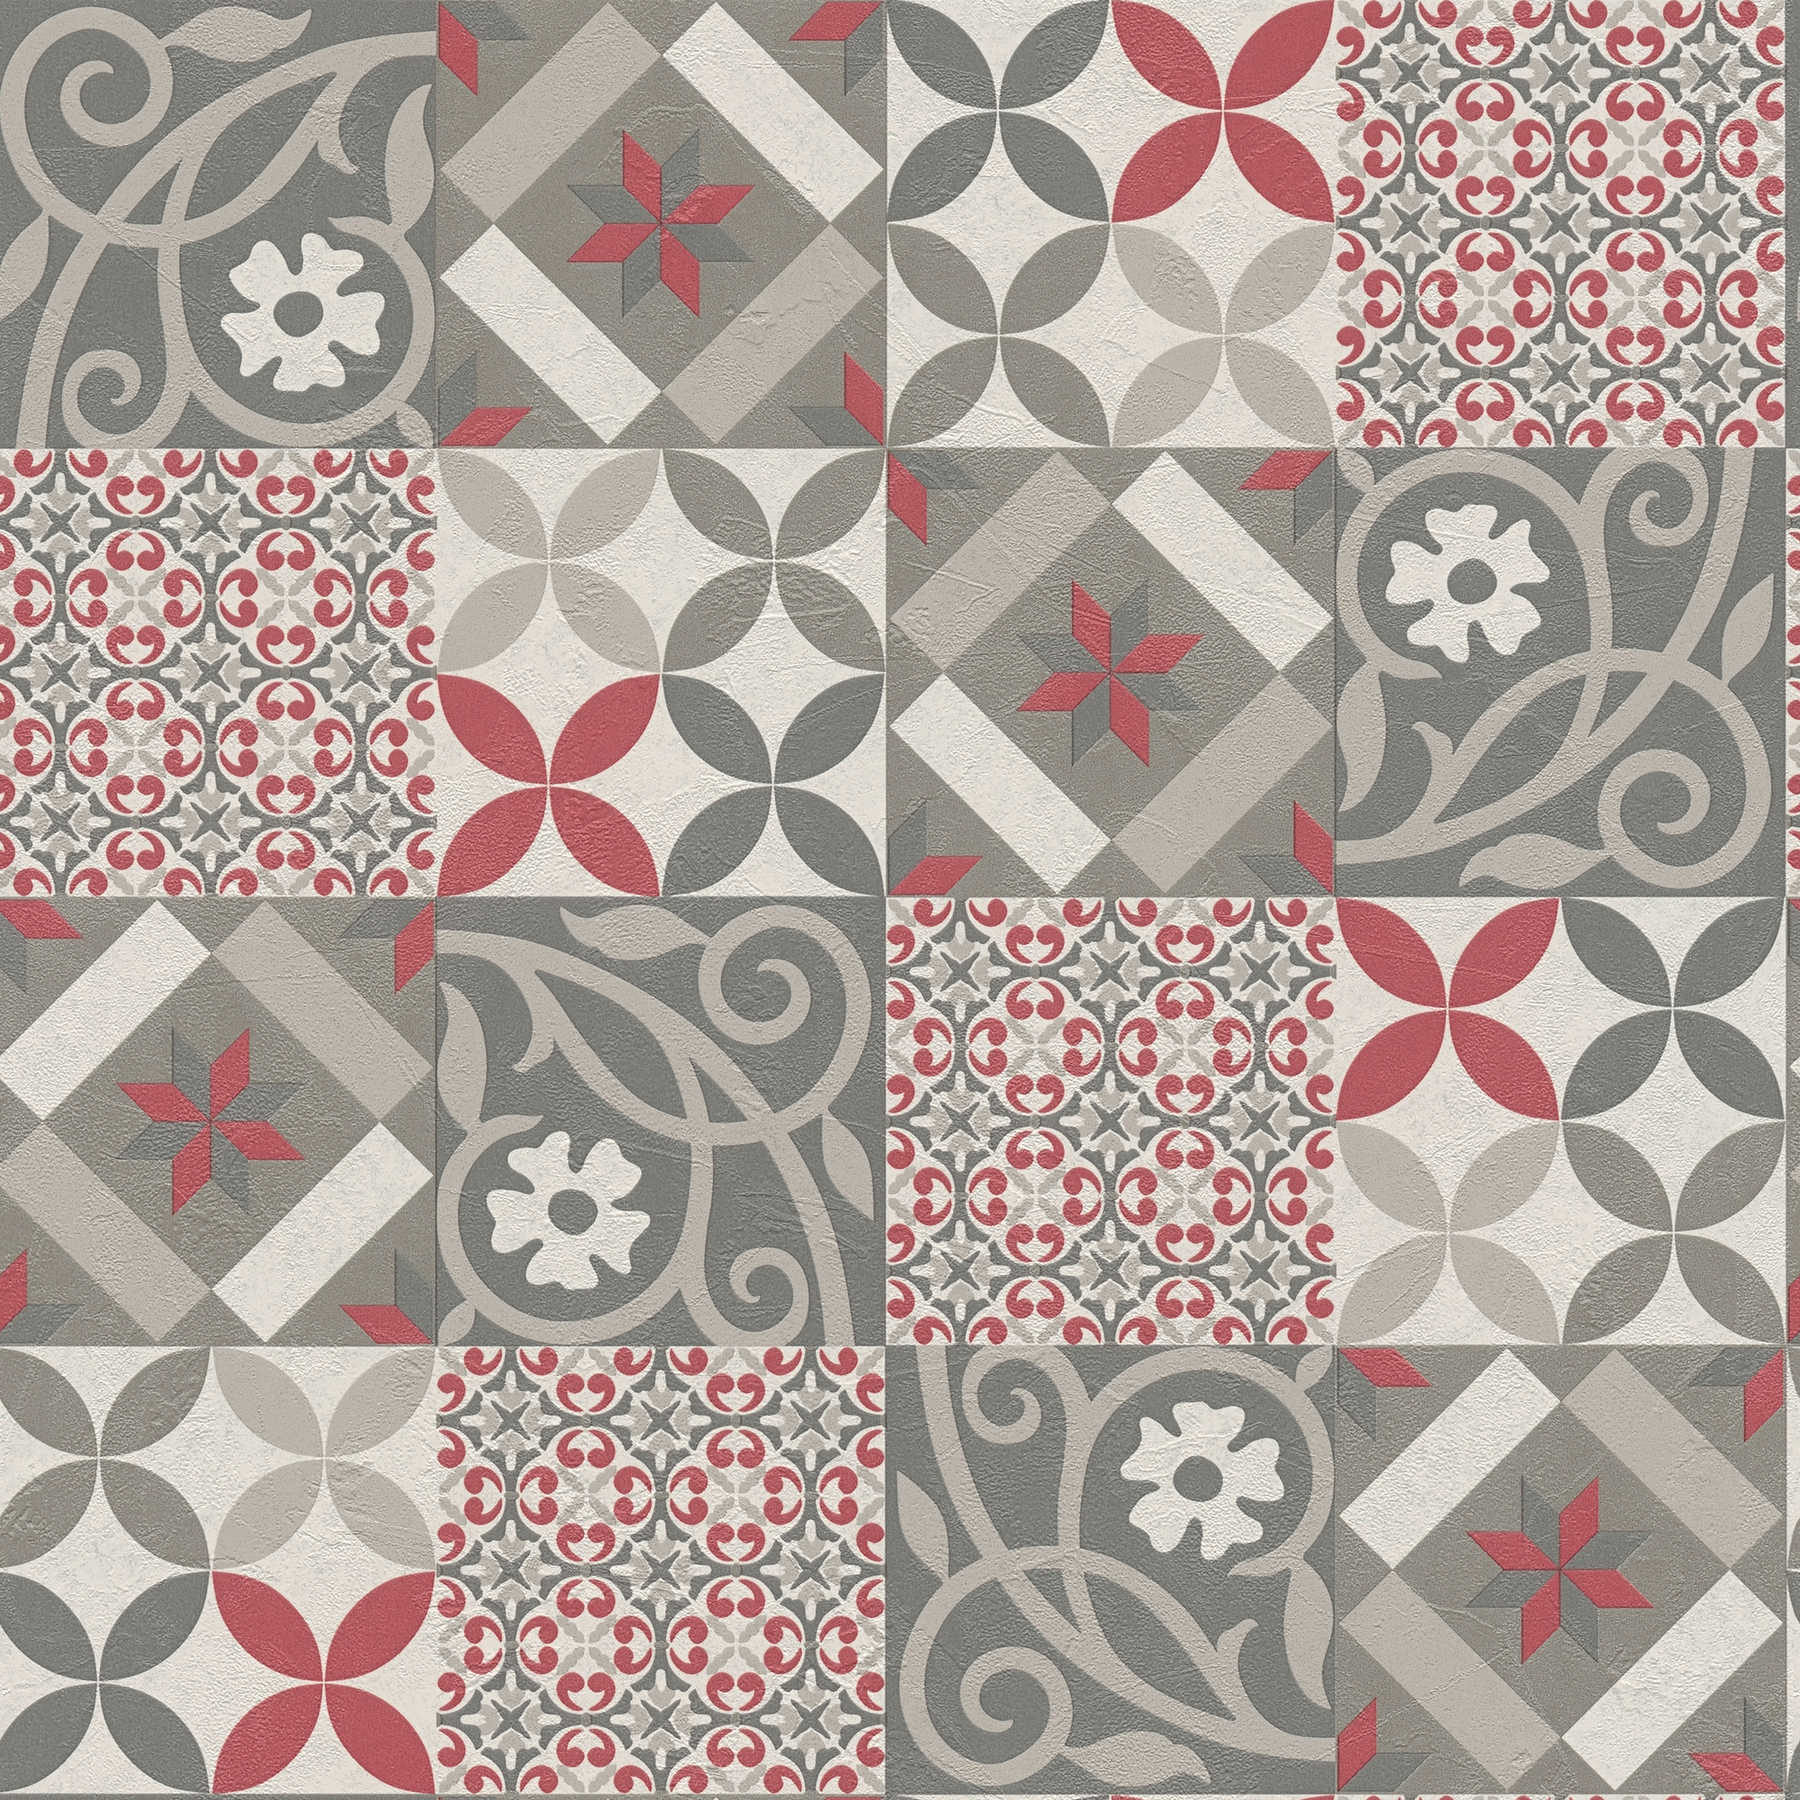         Wallpaper Decor tiles with floral pattern - black, red, anthracite
    